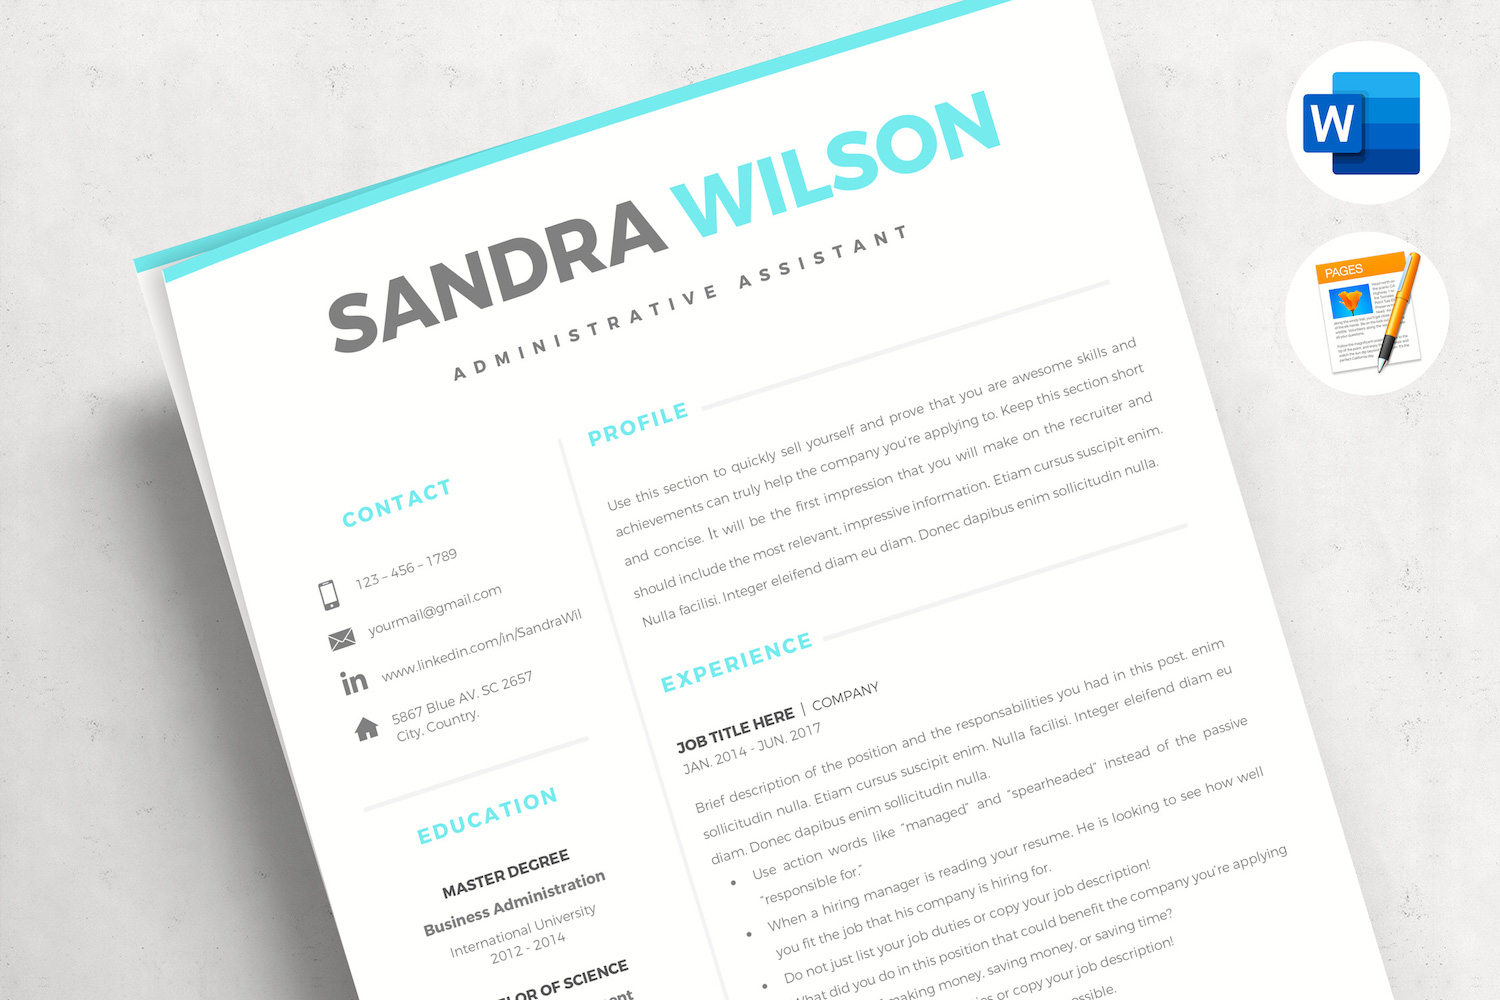 SANDRA B. - CV Bundle 2 & 3 Template Bundle with Cover Letter, References and social icon set